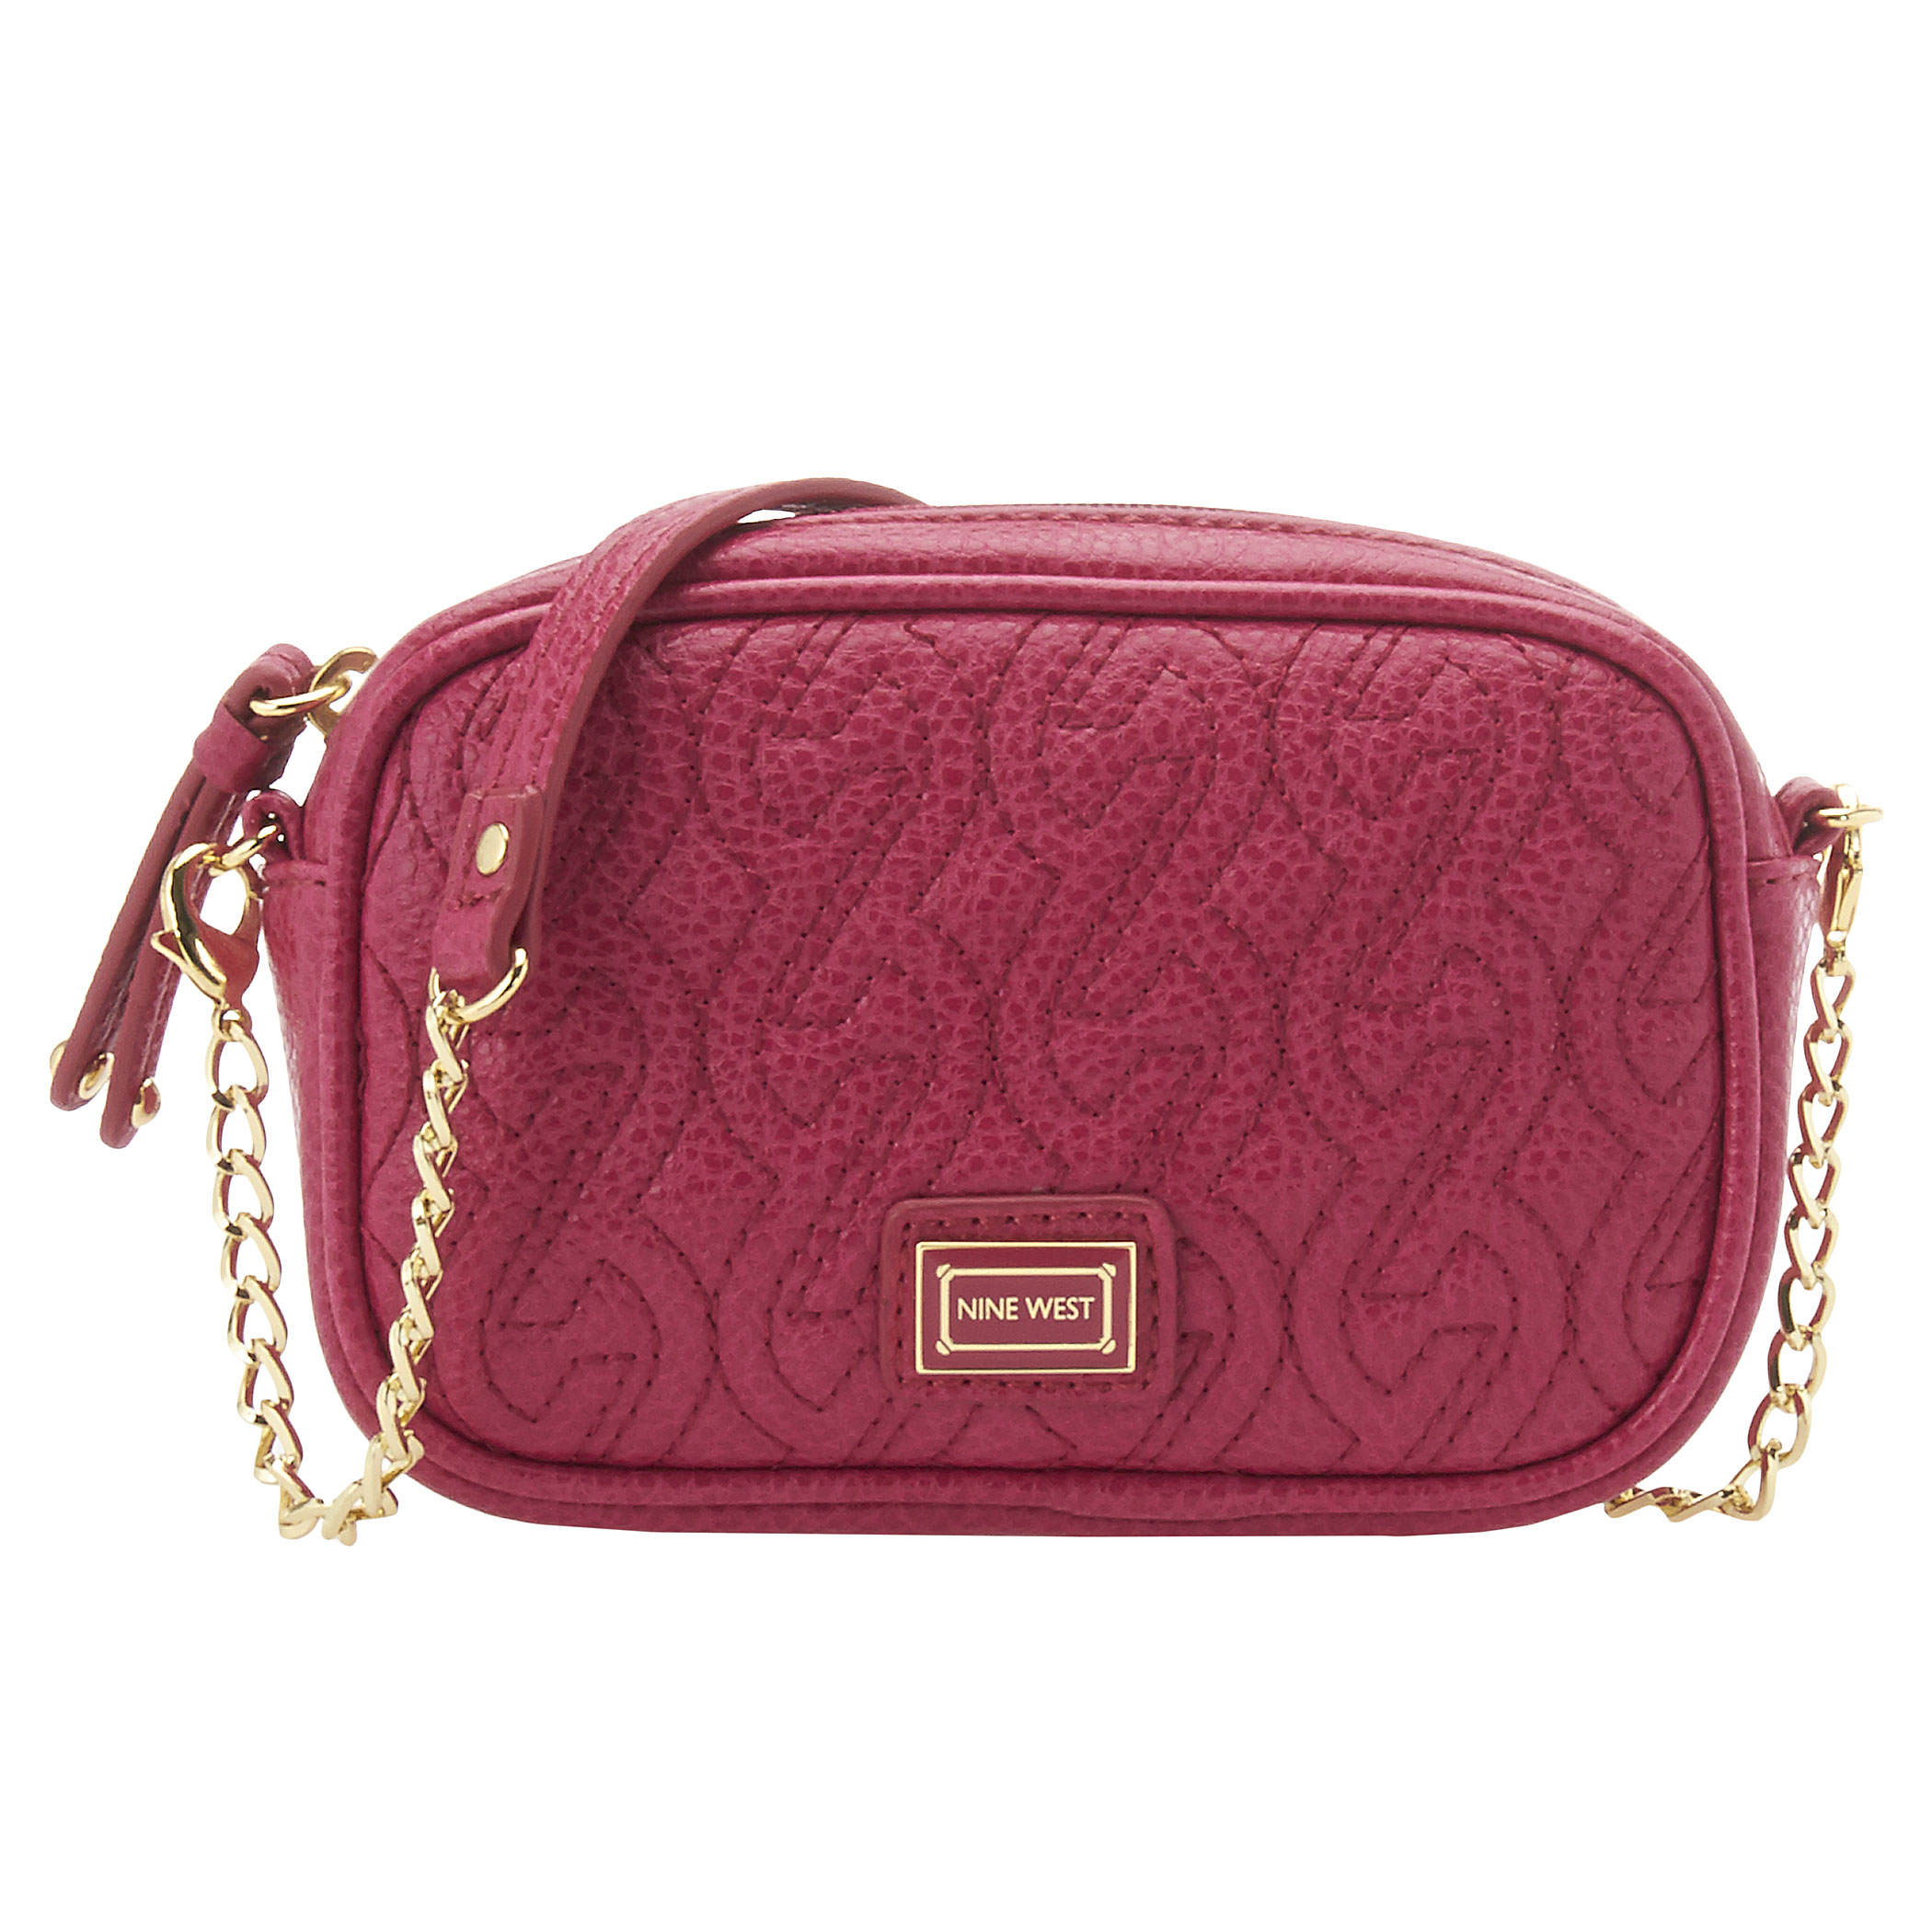 Nine West Quilted Chain Crossbody Bag in Pink - Lyst